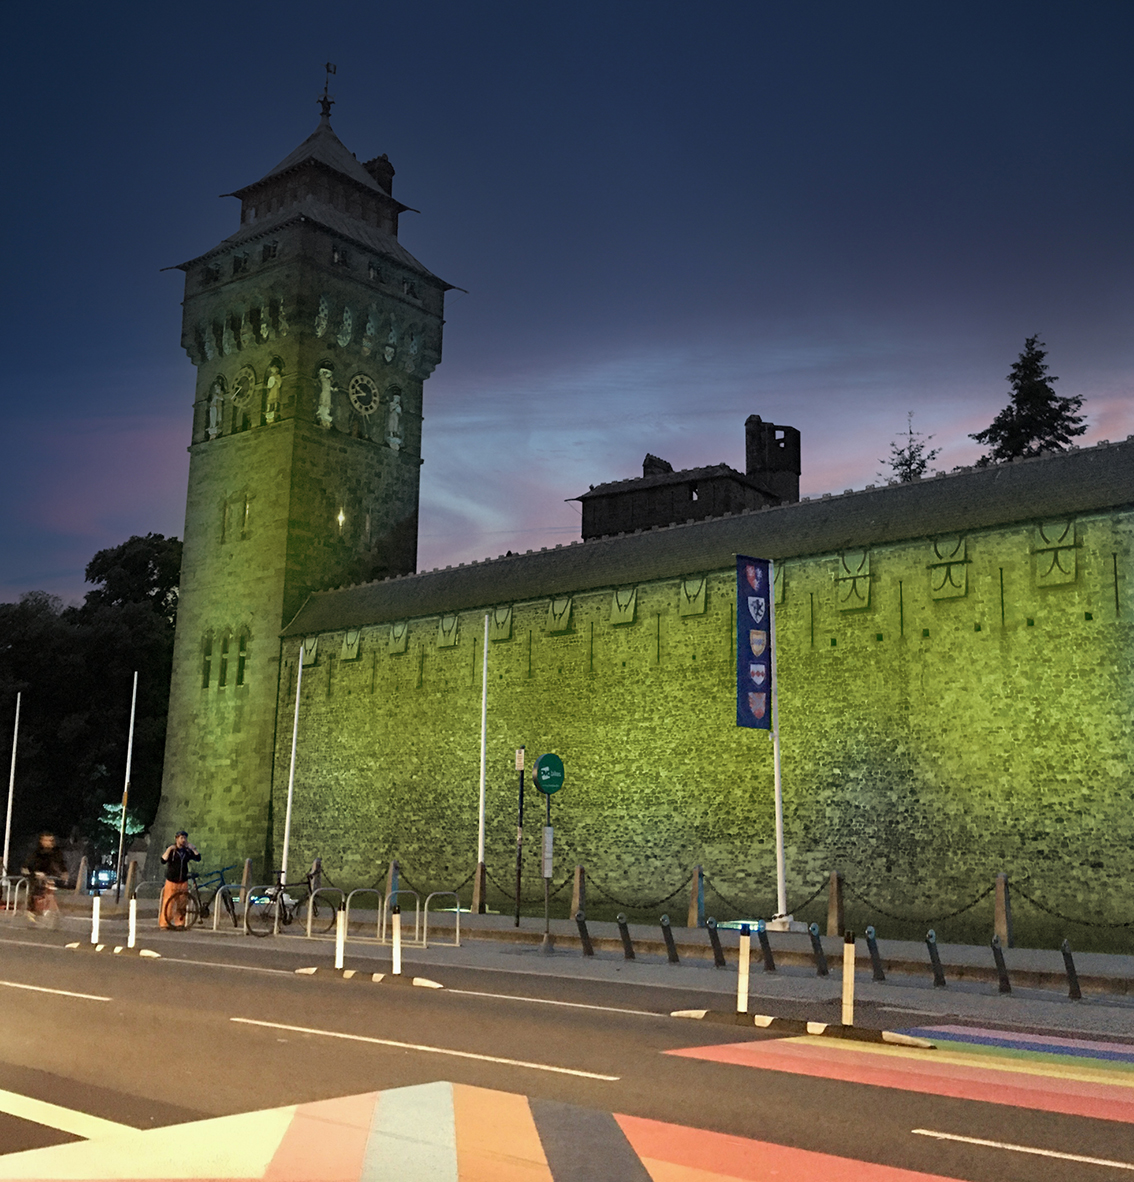 Tonight, #Cardiff Castle will shine bright in yellow to show solidarity with Endometriosis Awareness Month and the @Endomarch_Wales march taking place in the city today. 💛 Find out more about here: orlo.uk/fPKLJ #EndoMarchWales #EndometriosisAwareness